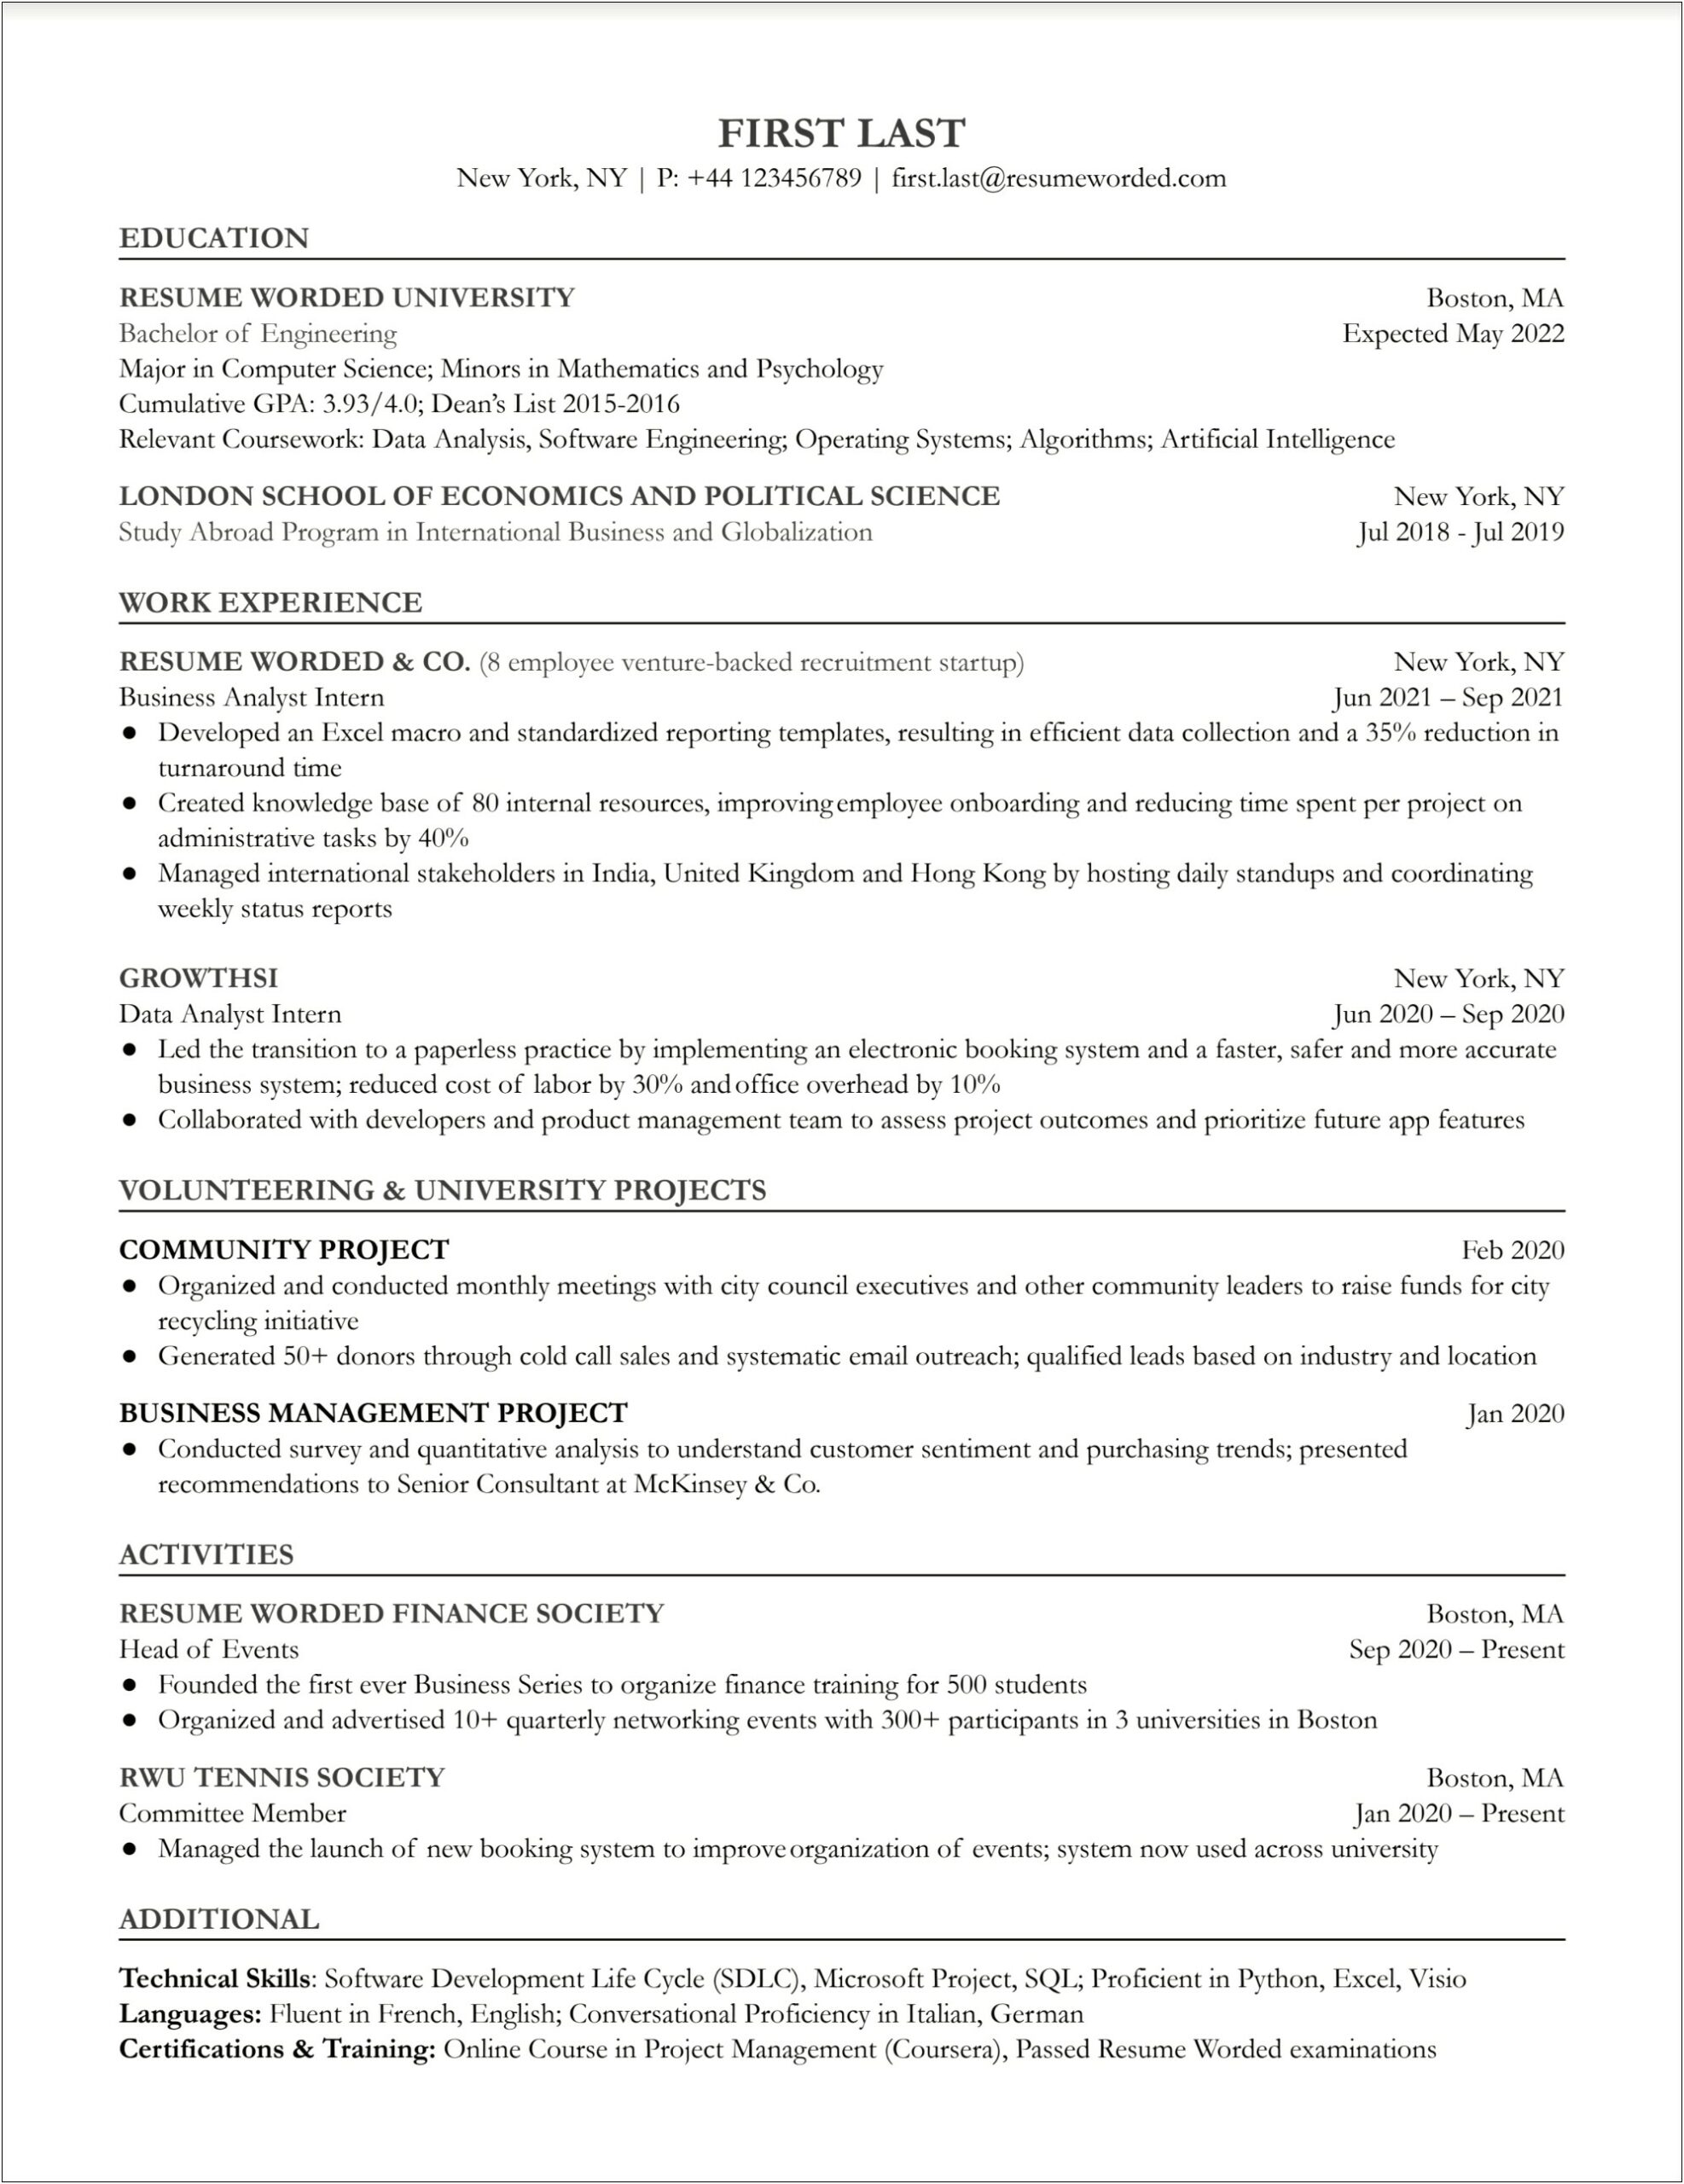 Mobile Application Business Analyst Resume Sample